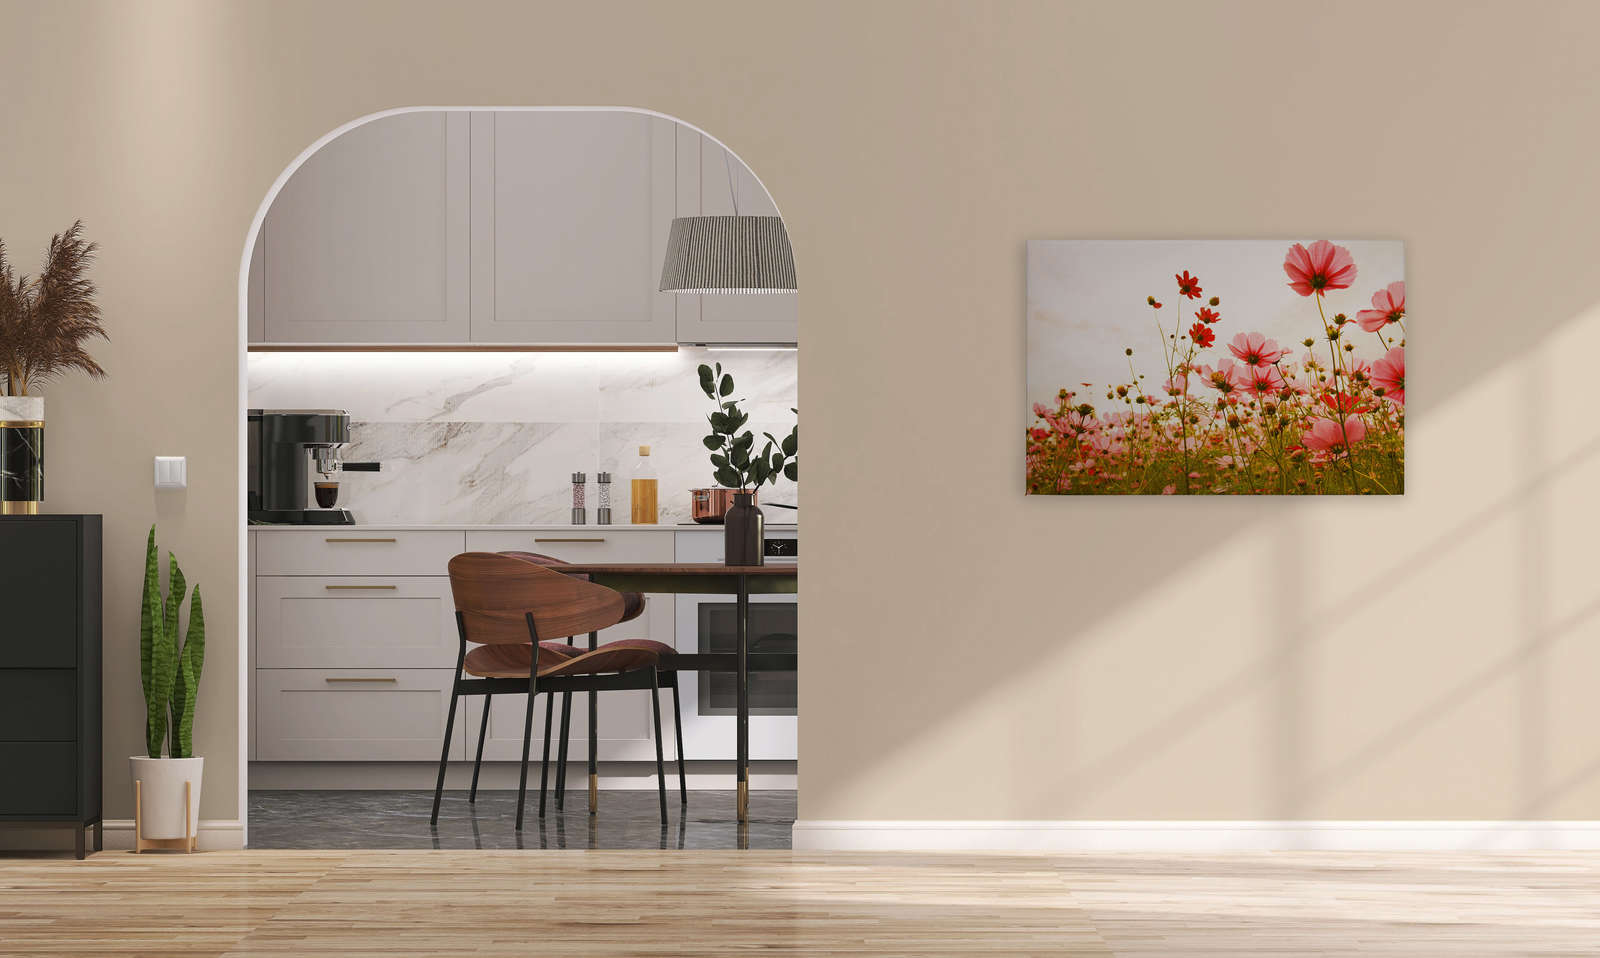             Canvas with flower meadow in spring | pink, green, white - 0.90 m x 0.60 m
        